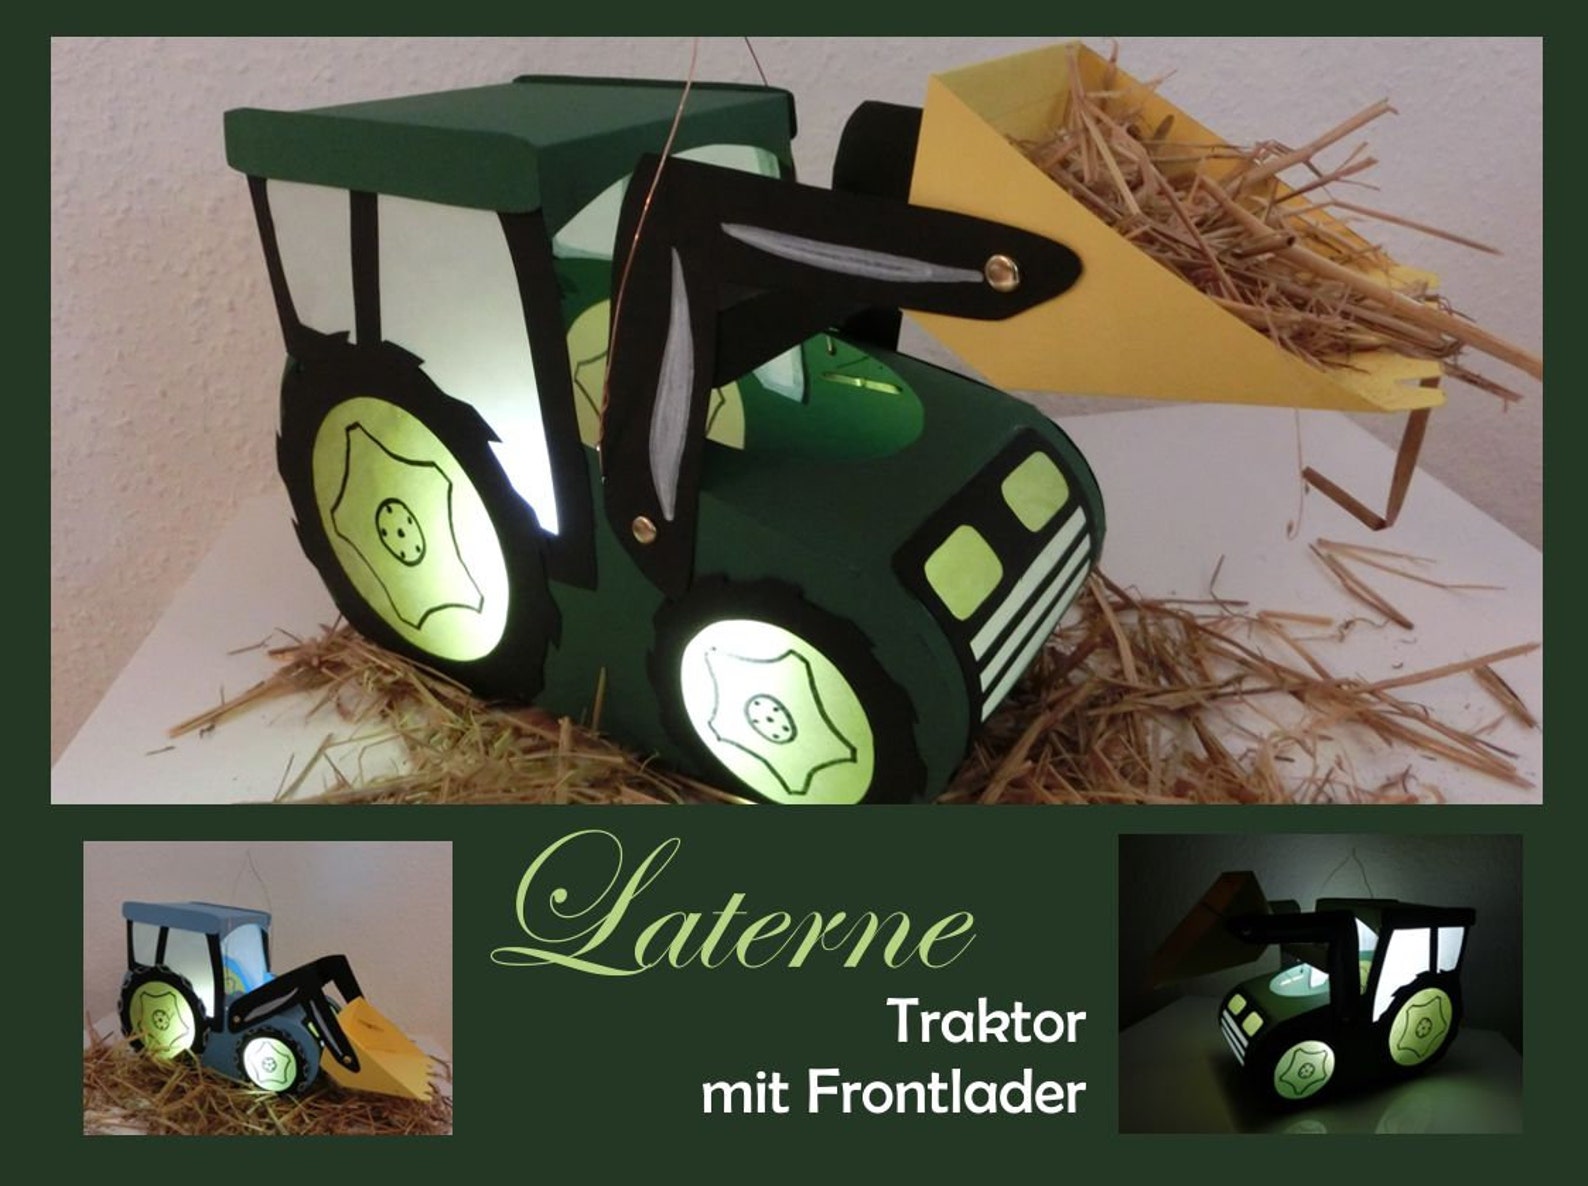 Tractor lantern with front loader craft instructions